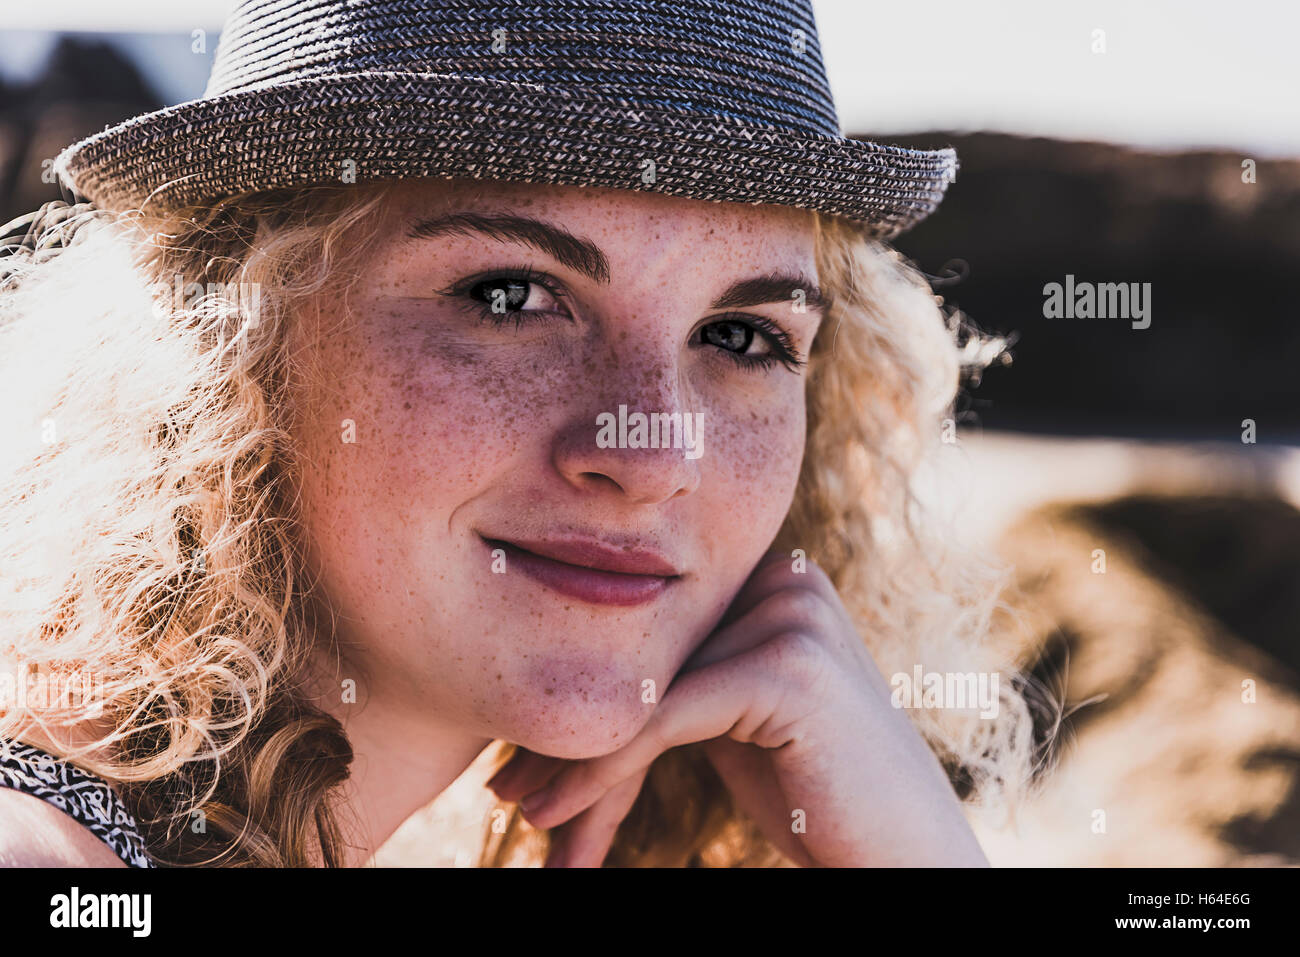 Portrait of teenage girl with freckles wearing a hat Stock Photo